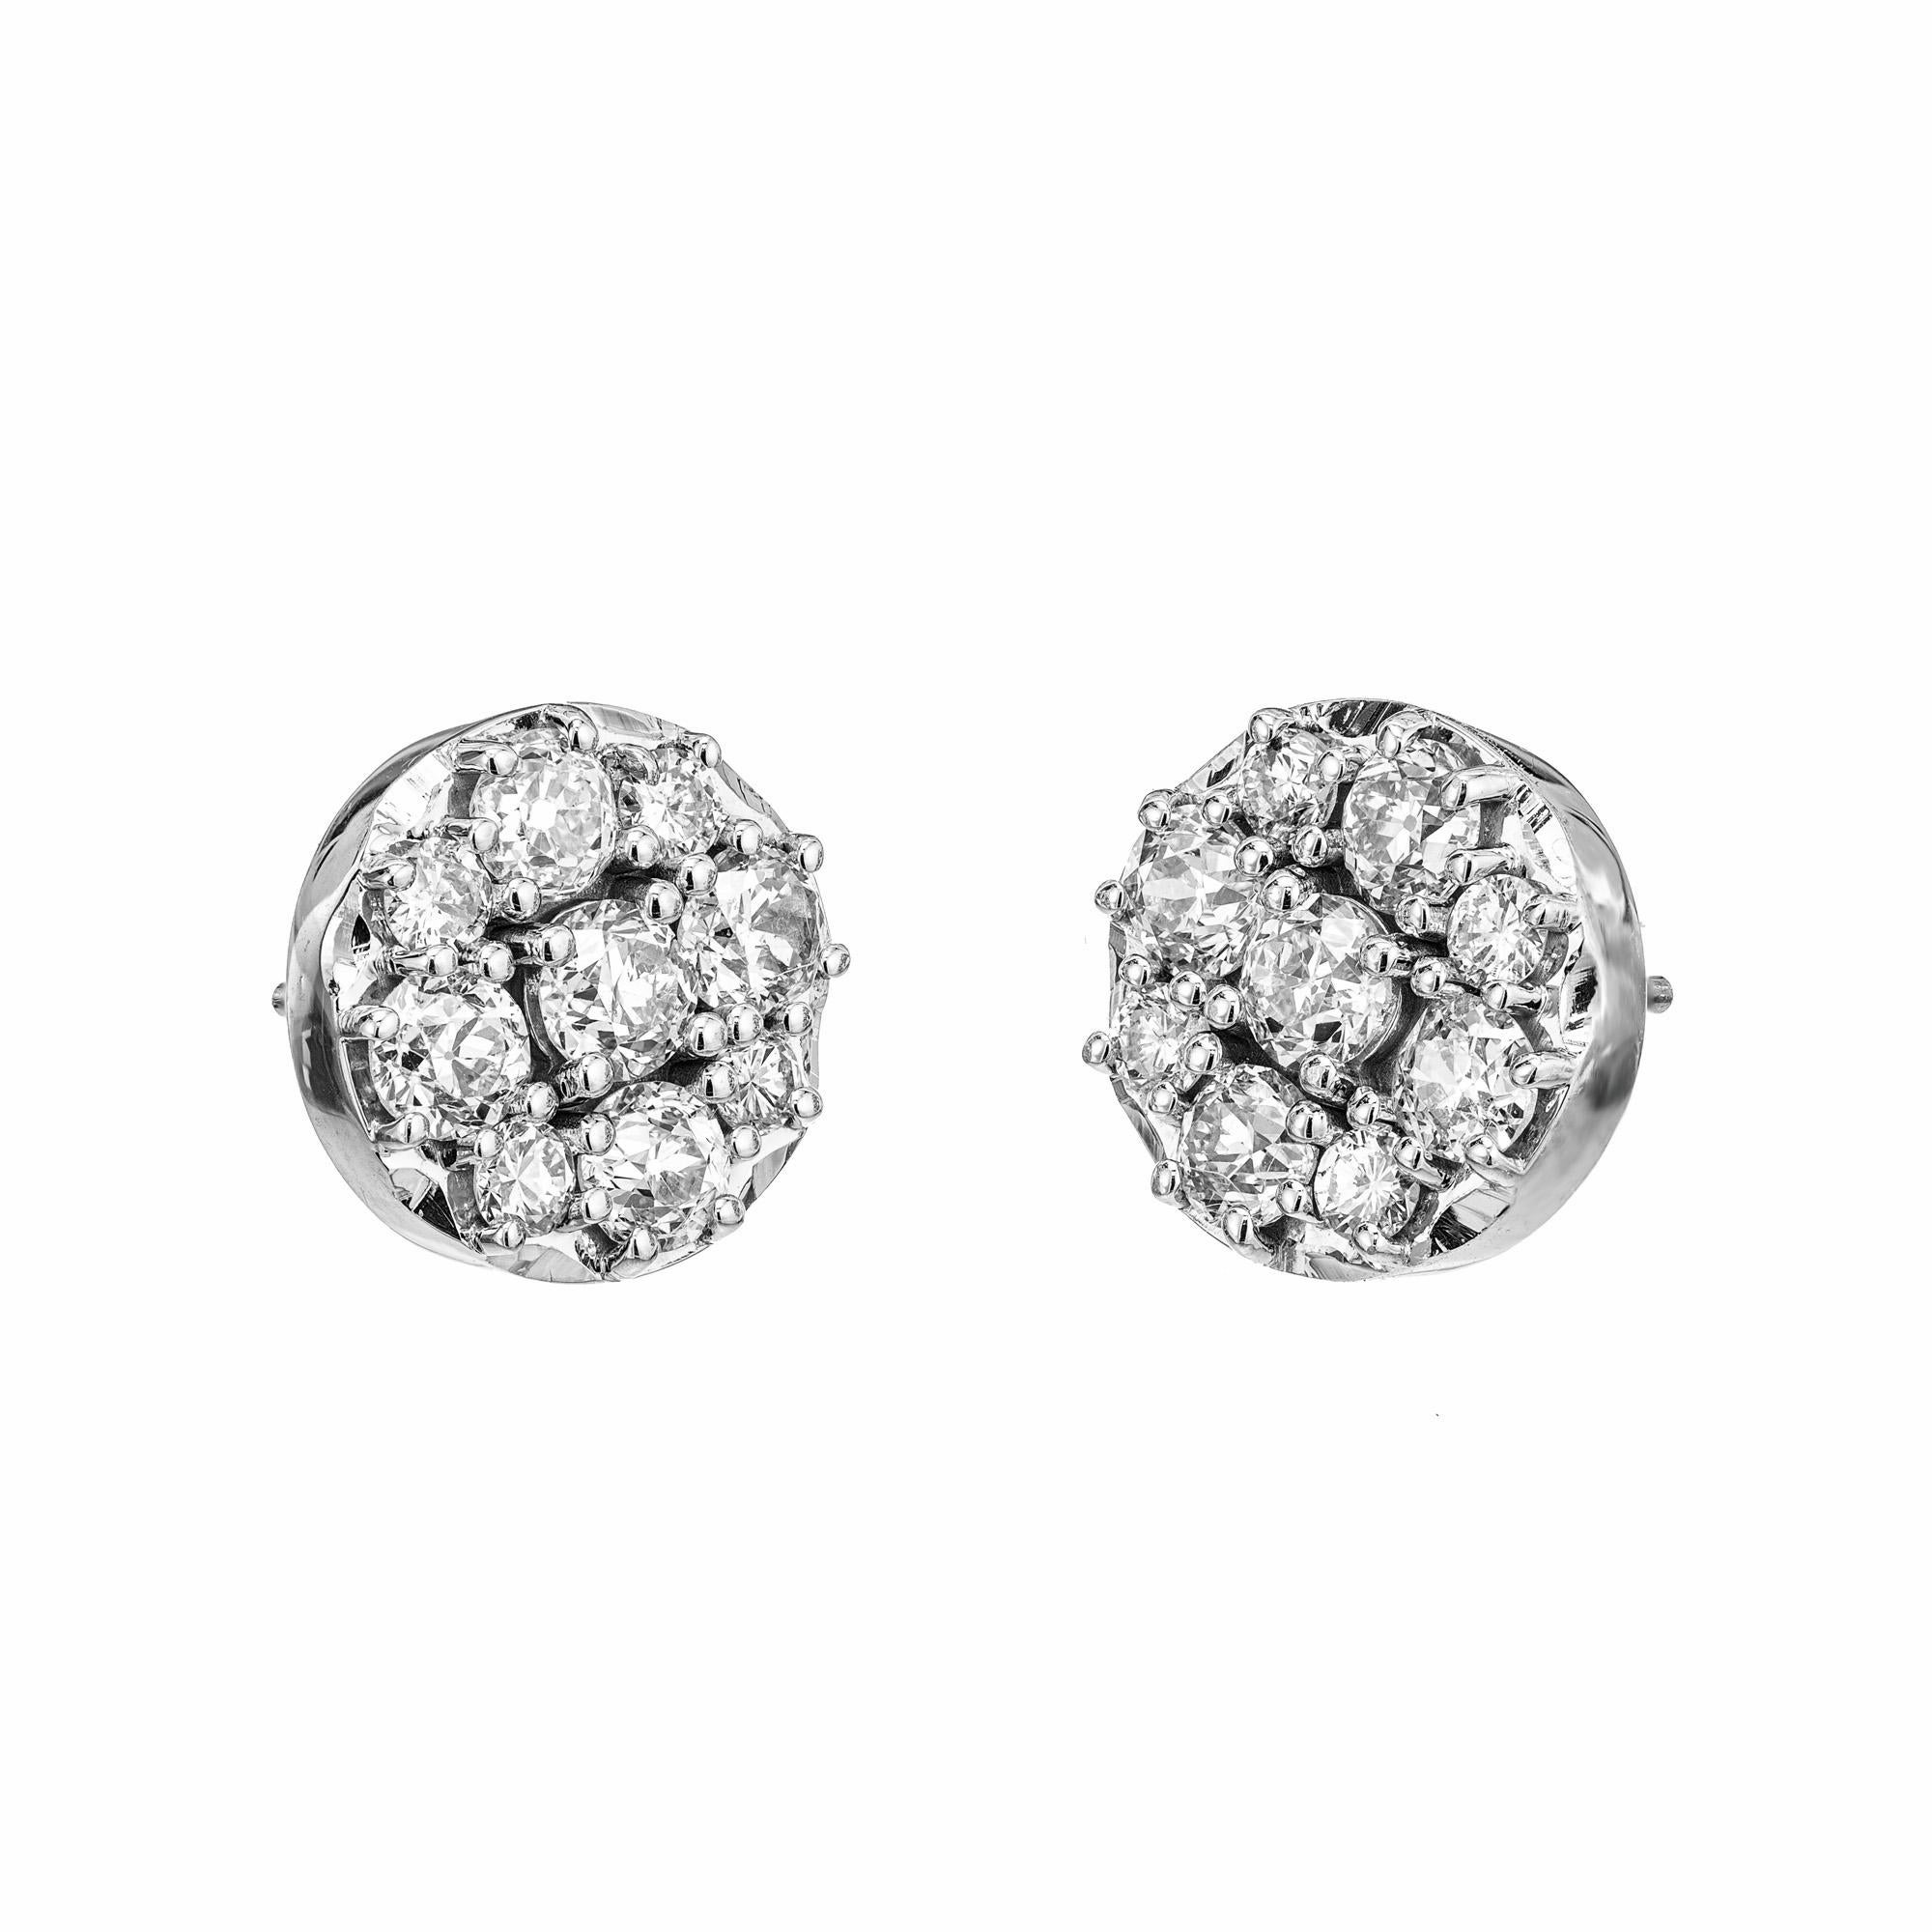 Round diamond cluster earrings in 14k white gold. 18 round Old European cut diamond clusters, set in 14k white gold settings. 

18 round old European cut diamonds, I-J VS-SI approx. 1.96cts
14k white gold 
Stamped: 14k
4.4 grams
Top to bottom: